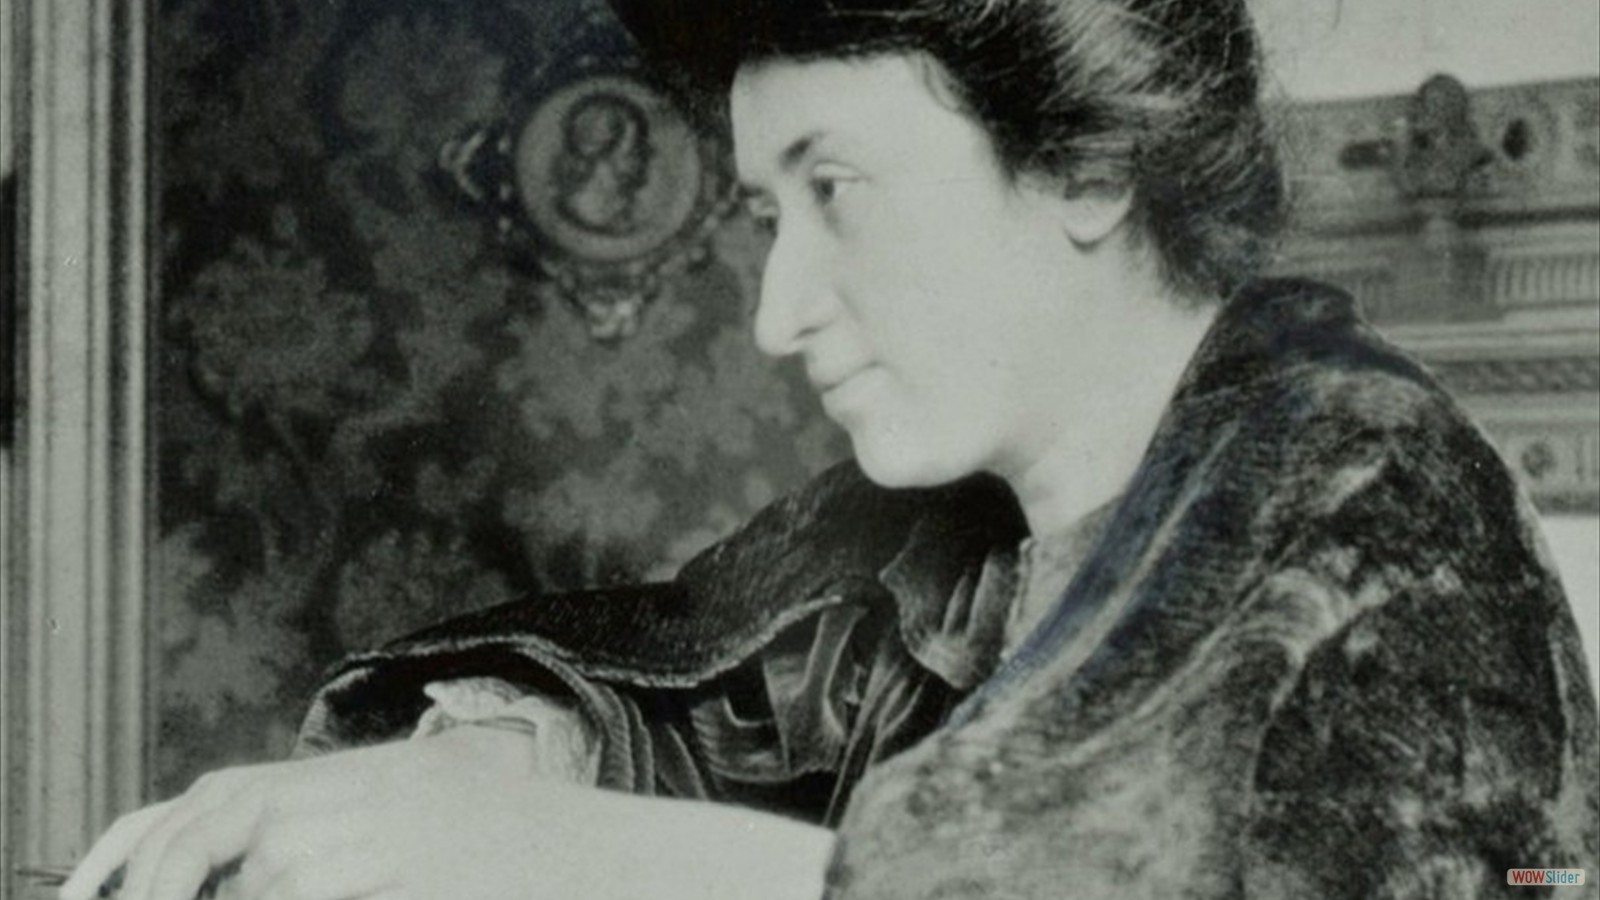 Rosa Luxemburg at her desk in her Berlin apartment (c. 1907)